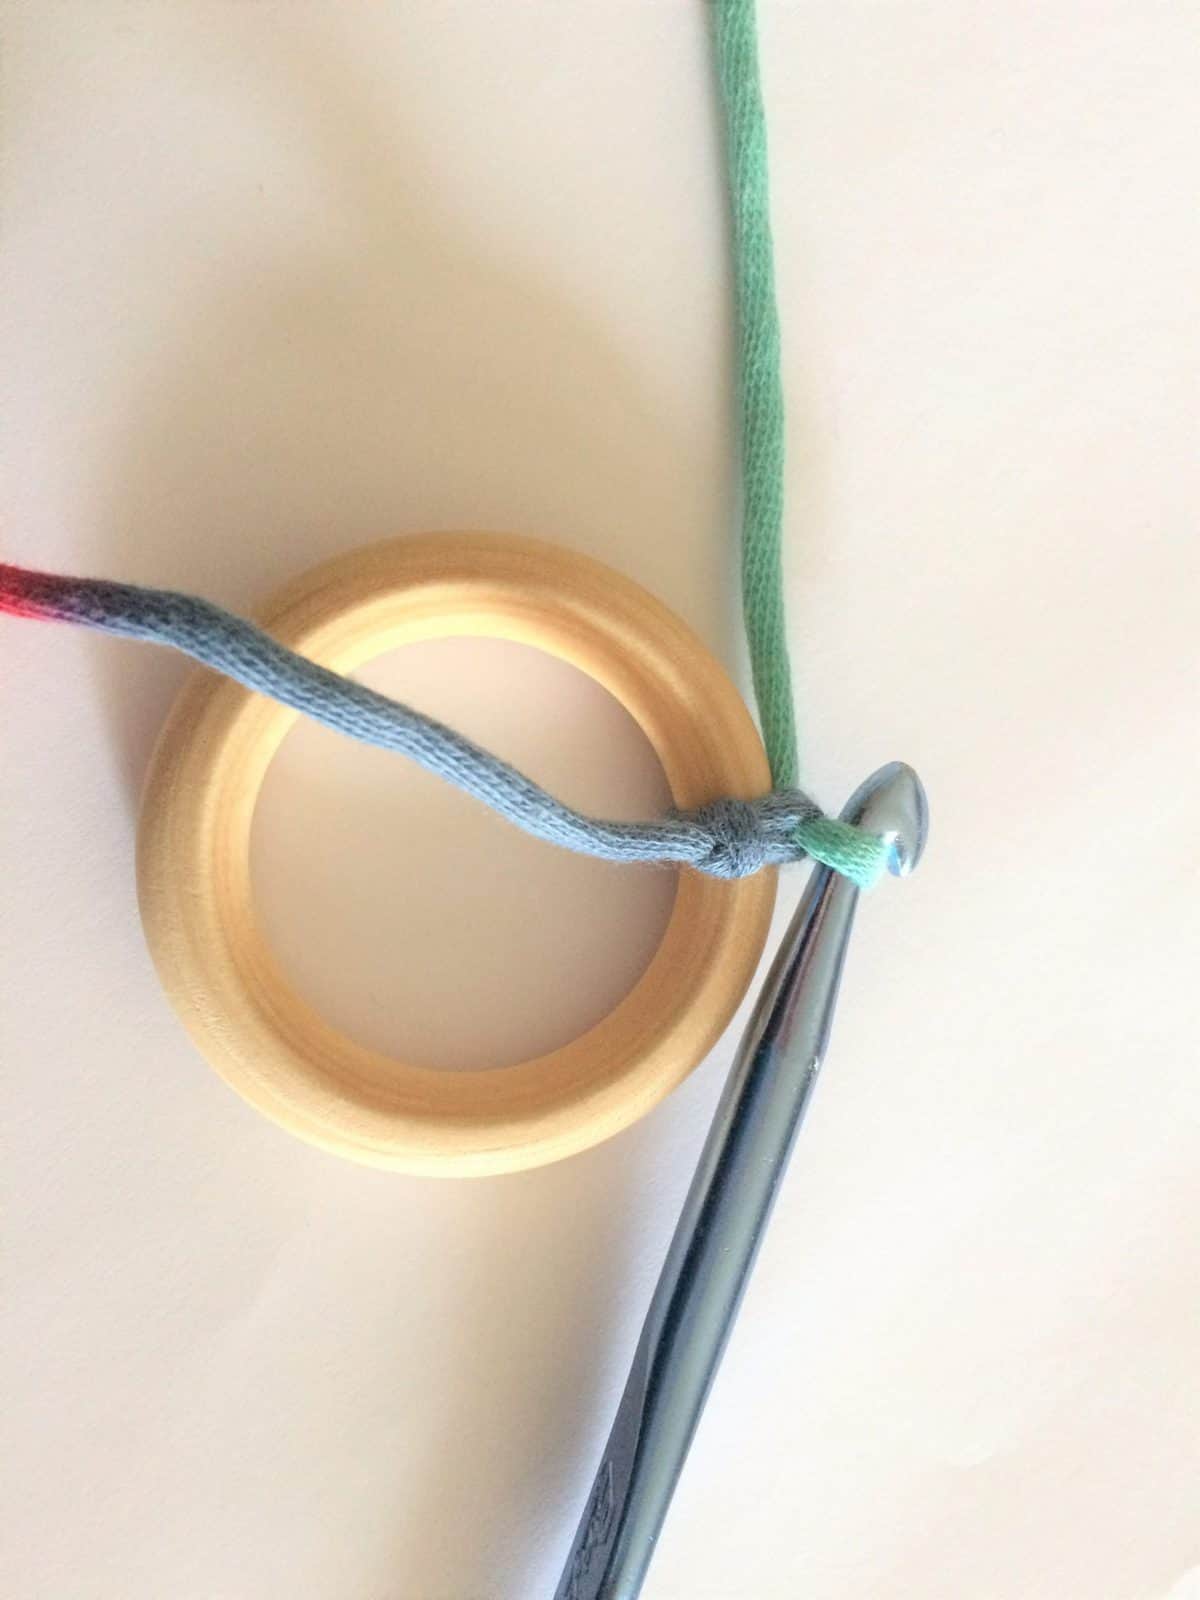 Yarn attached to ring